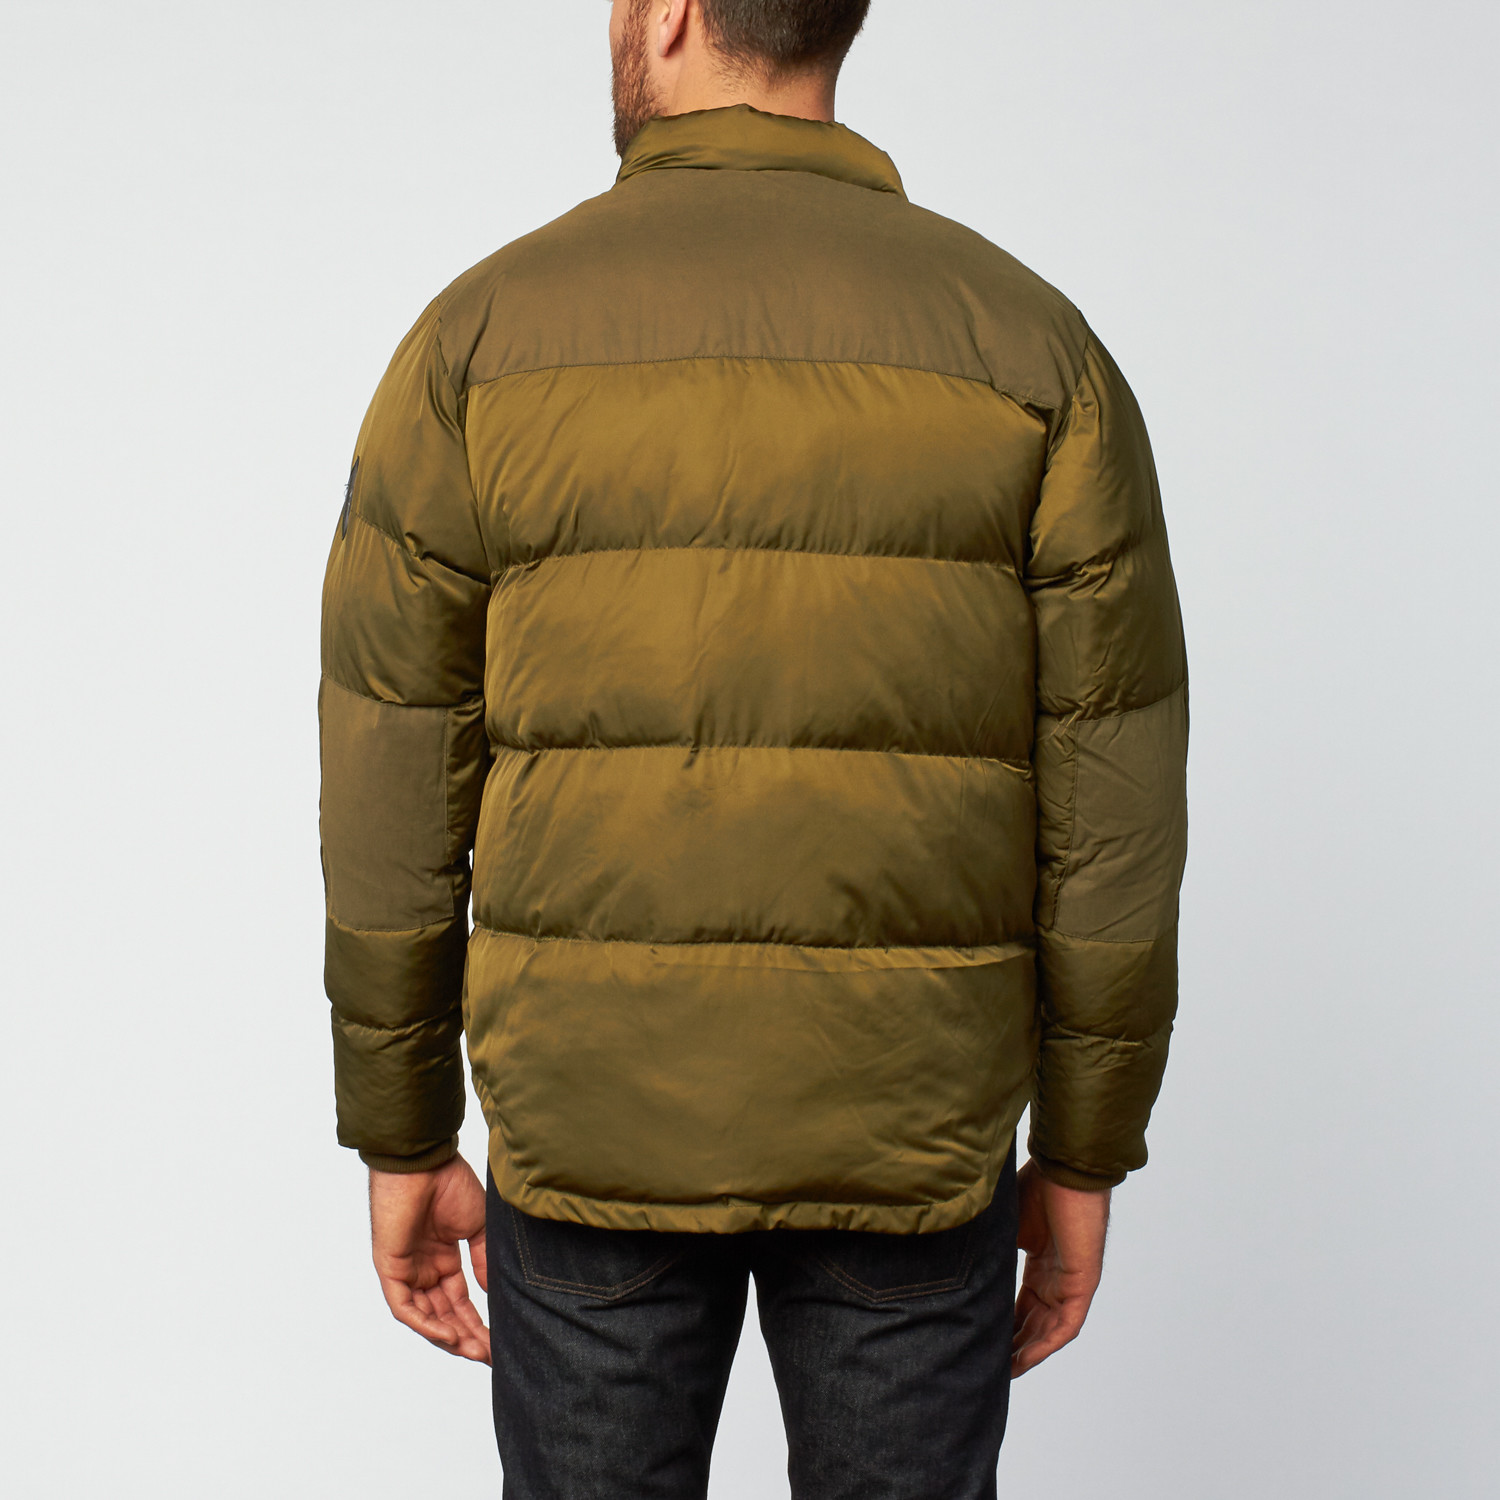 Canada Bubble Jacket // Army Green (S) - Fat Moose - Touch of Modern